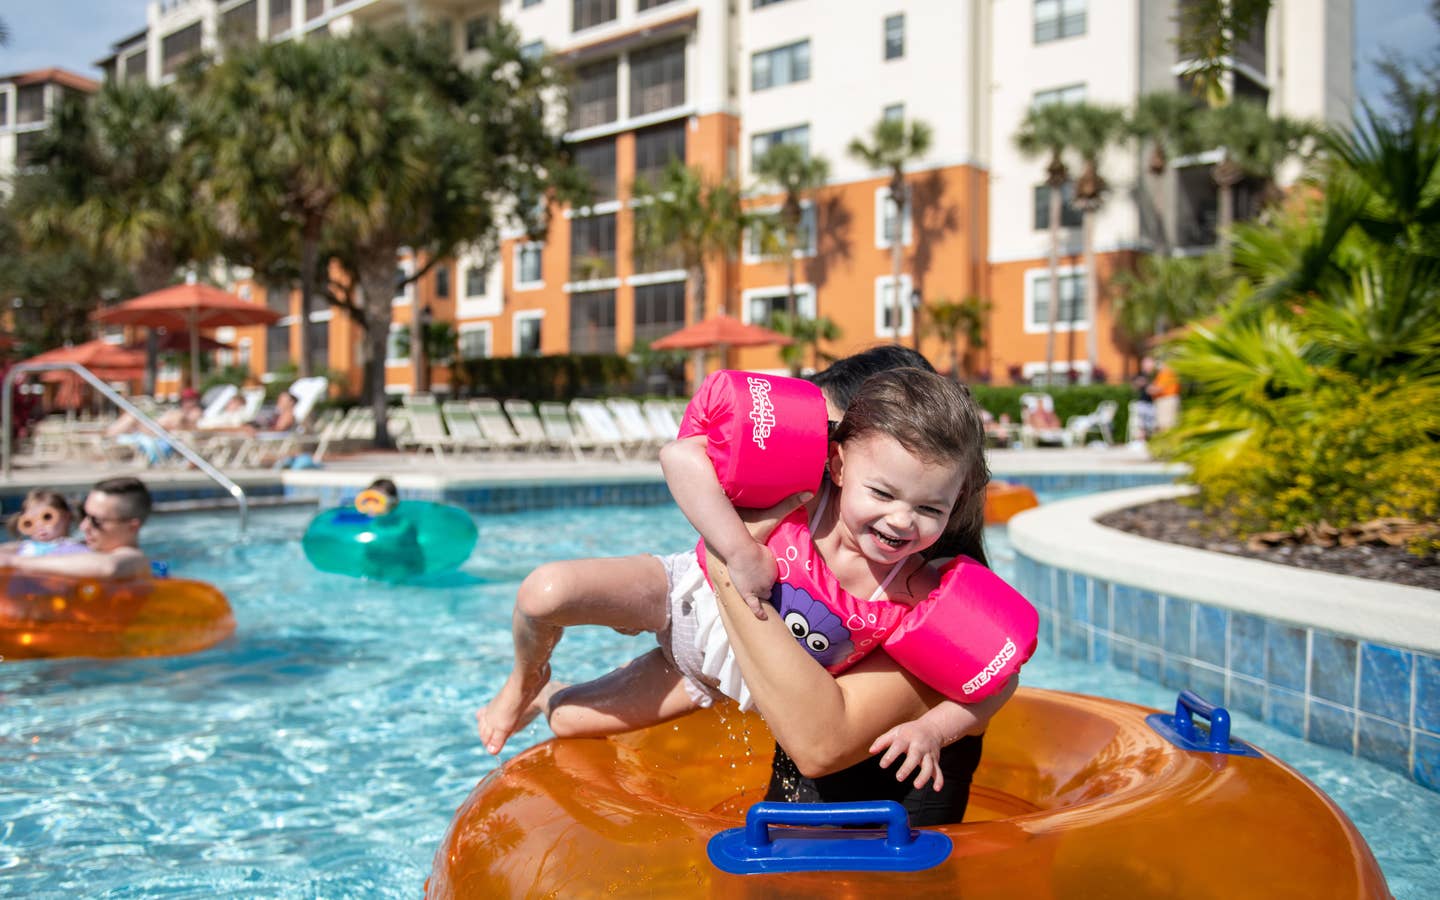 Family floating down the lazy river with inner tubes at Orange Lake Resort in Orlando, FL.